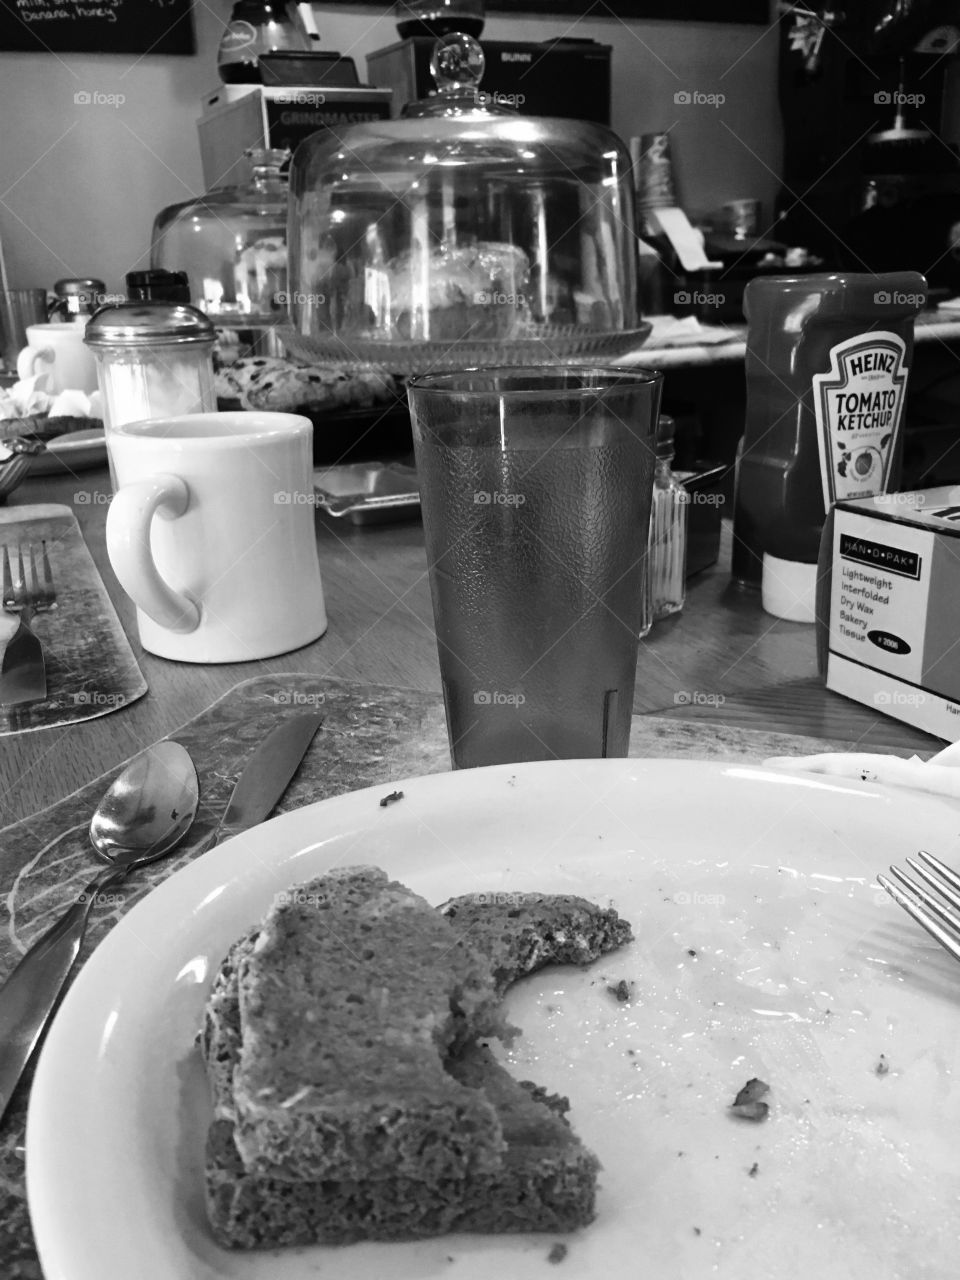 Remains of breakfast at the diner